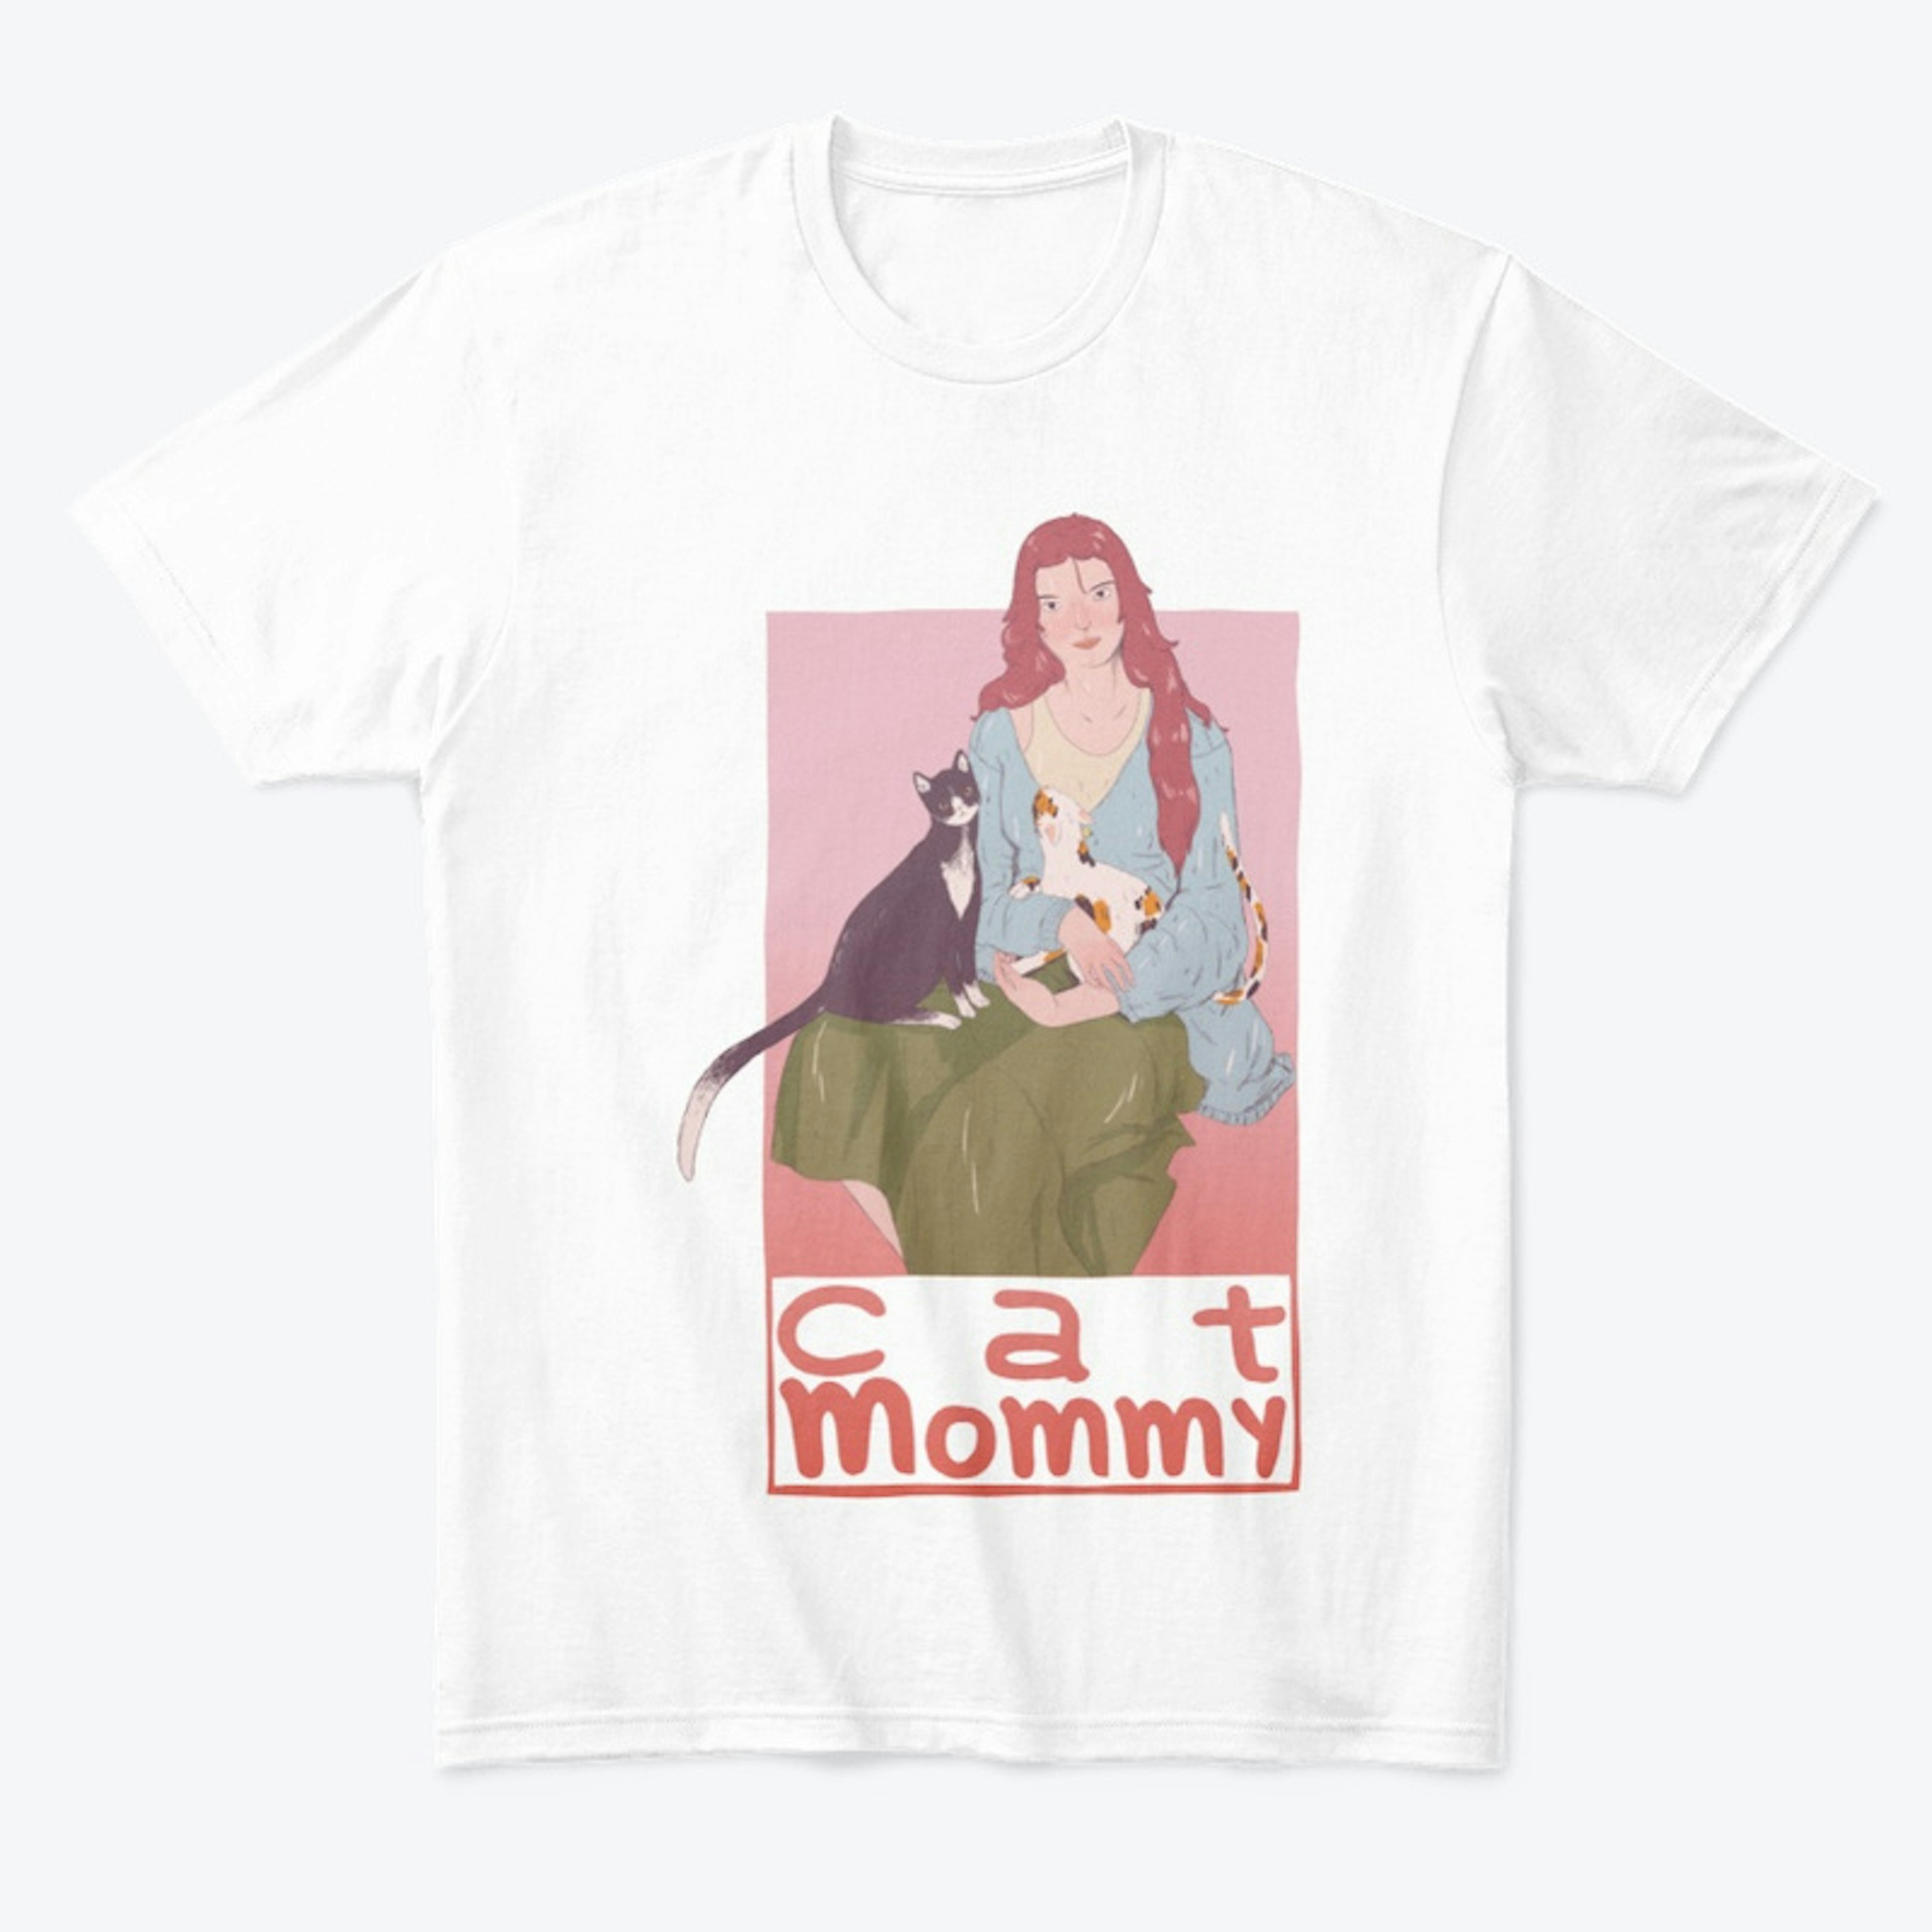 Cat Mommy